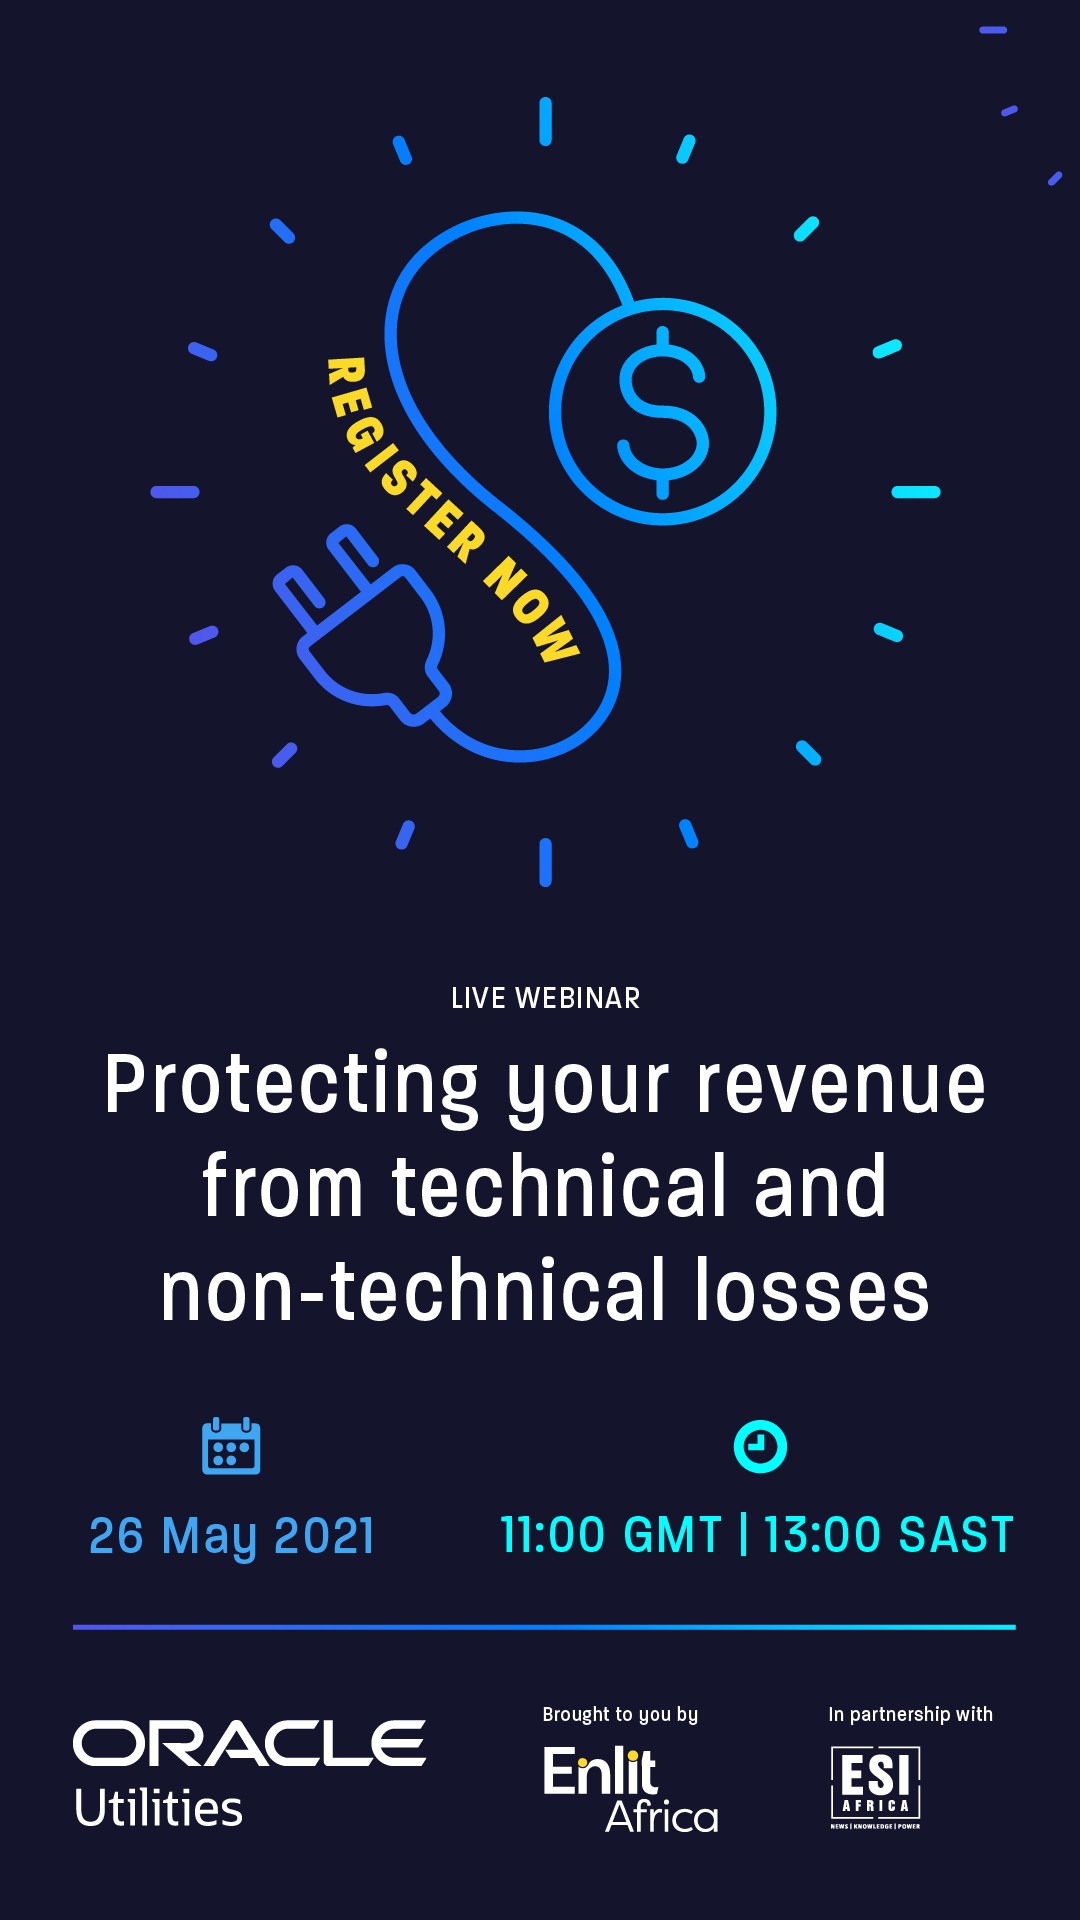 LIVE WEBINAR - Protecting your revenue from technical and non-technical losses